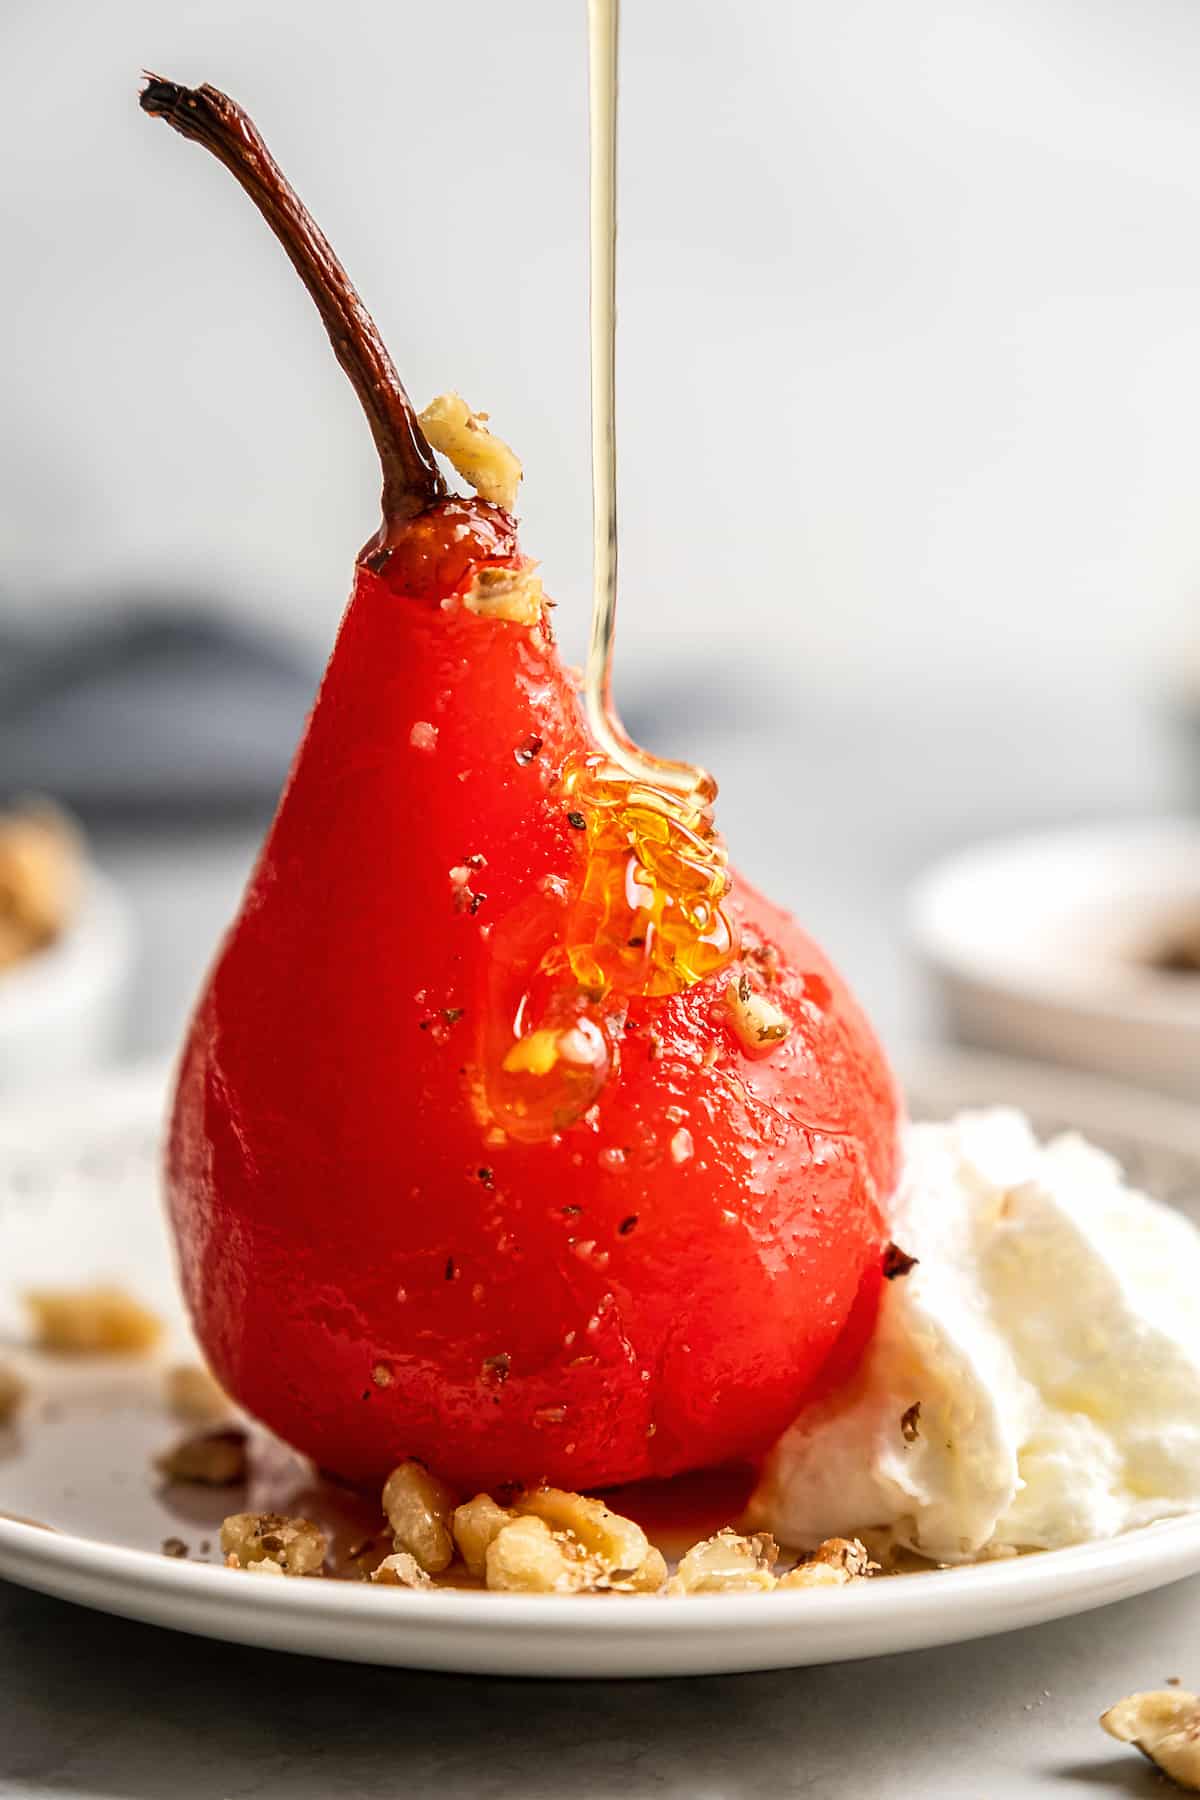 Close up of a poached pear on a plate with walnuts and whipped cream, with h oney being poured over it